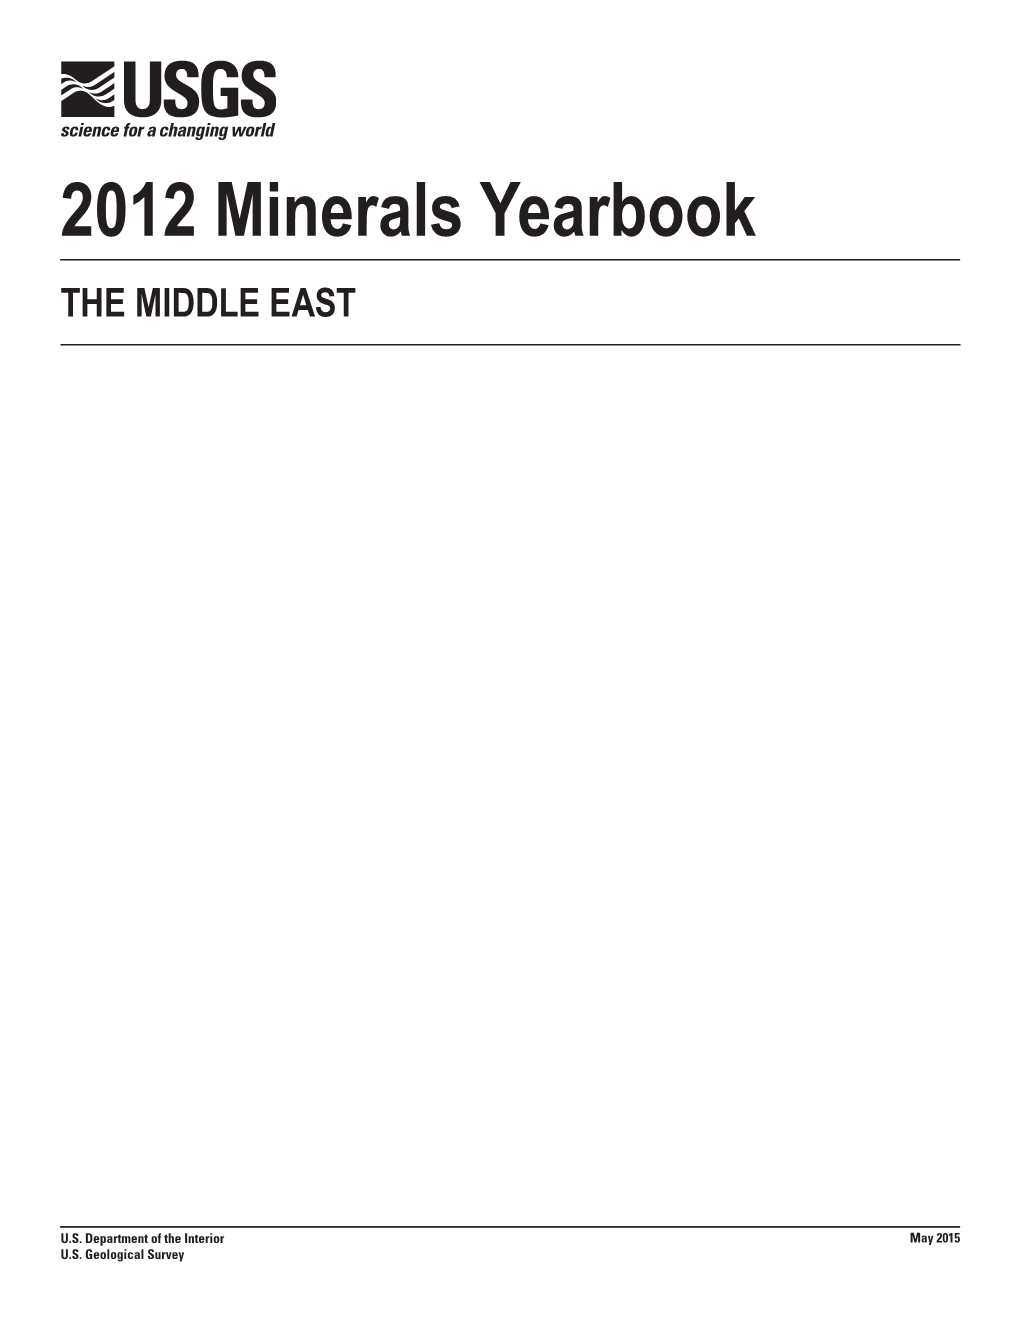 The Mineral Industries of the Middle East in 2012